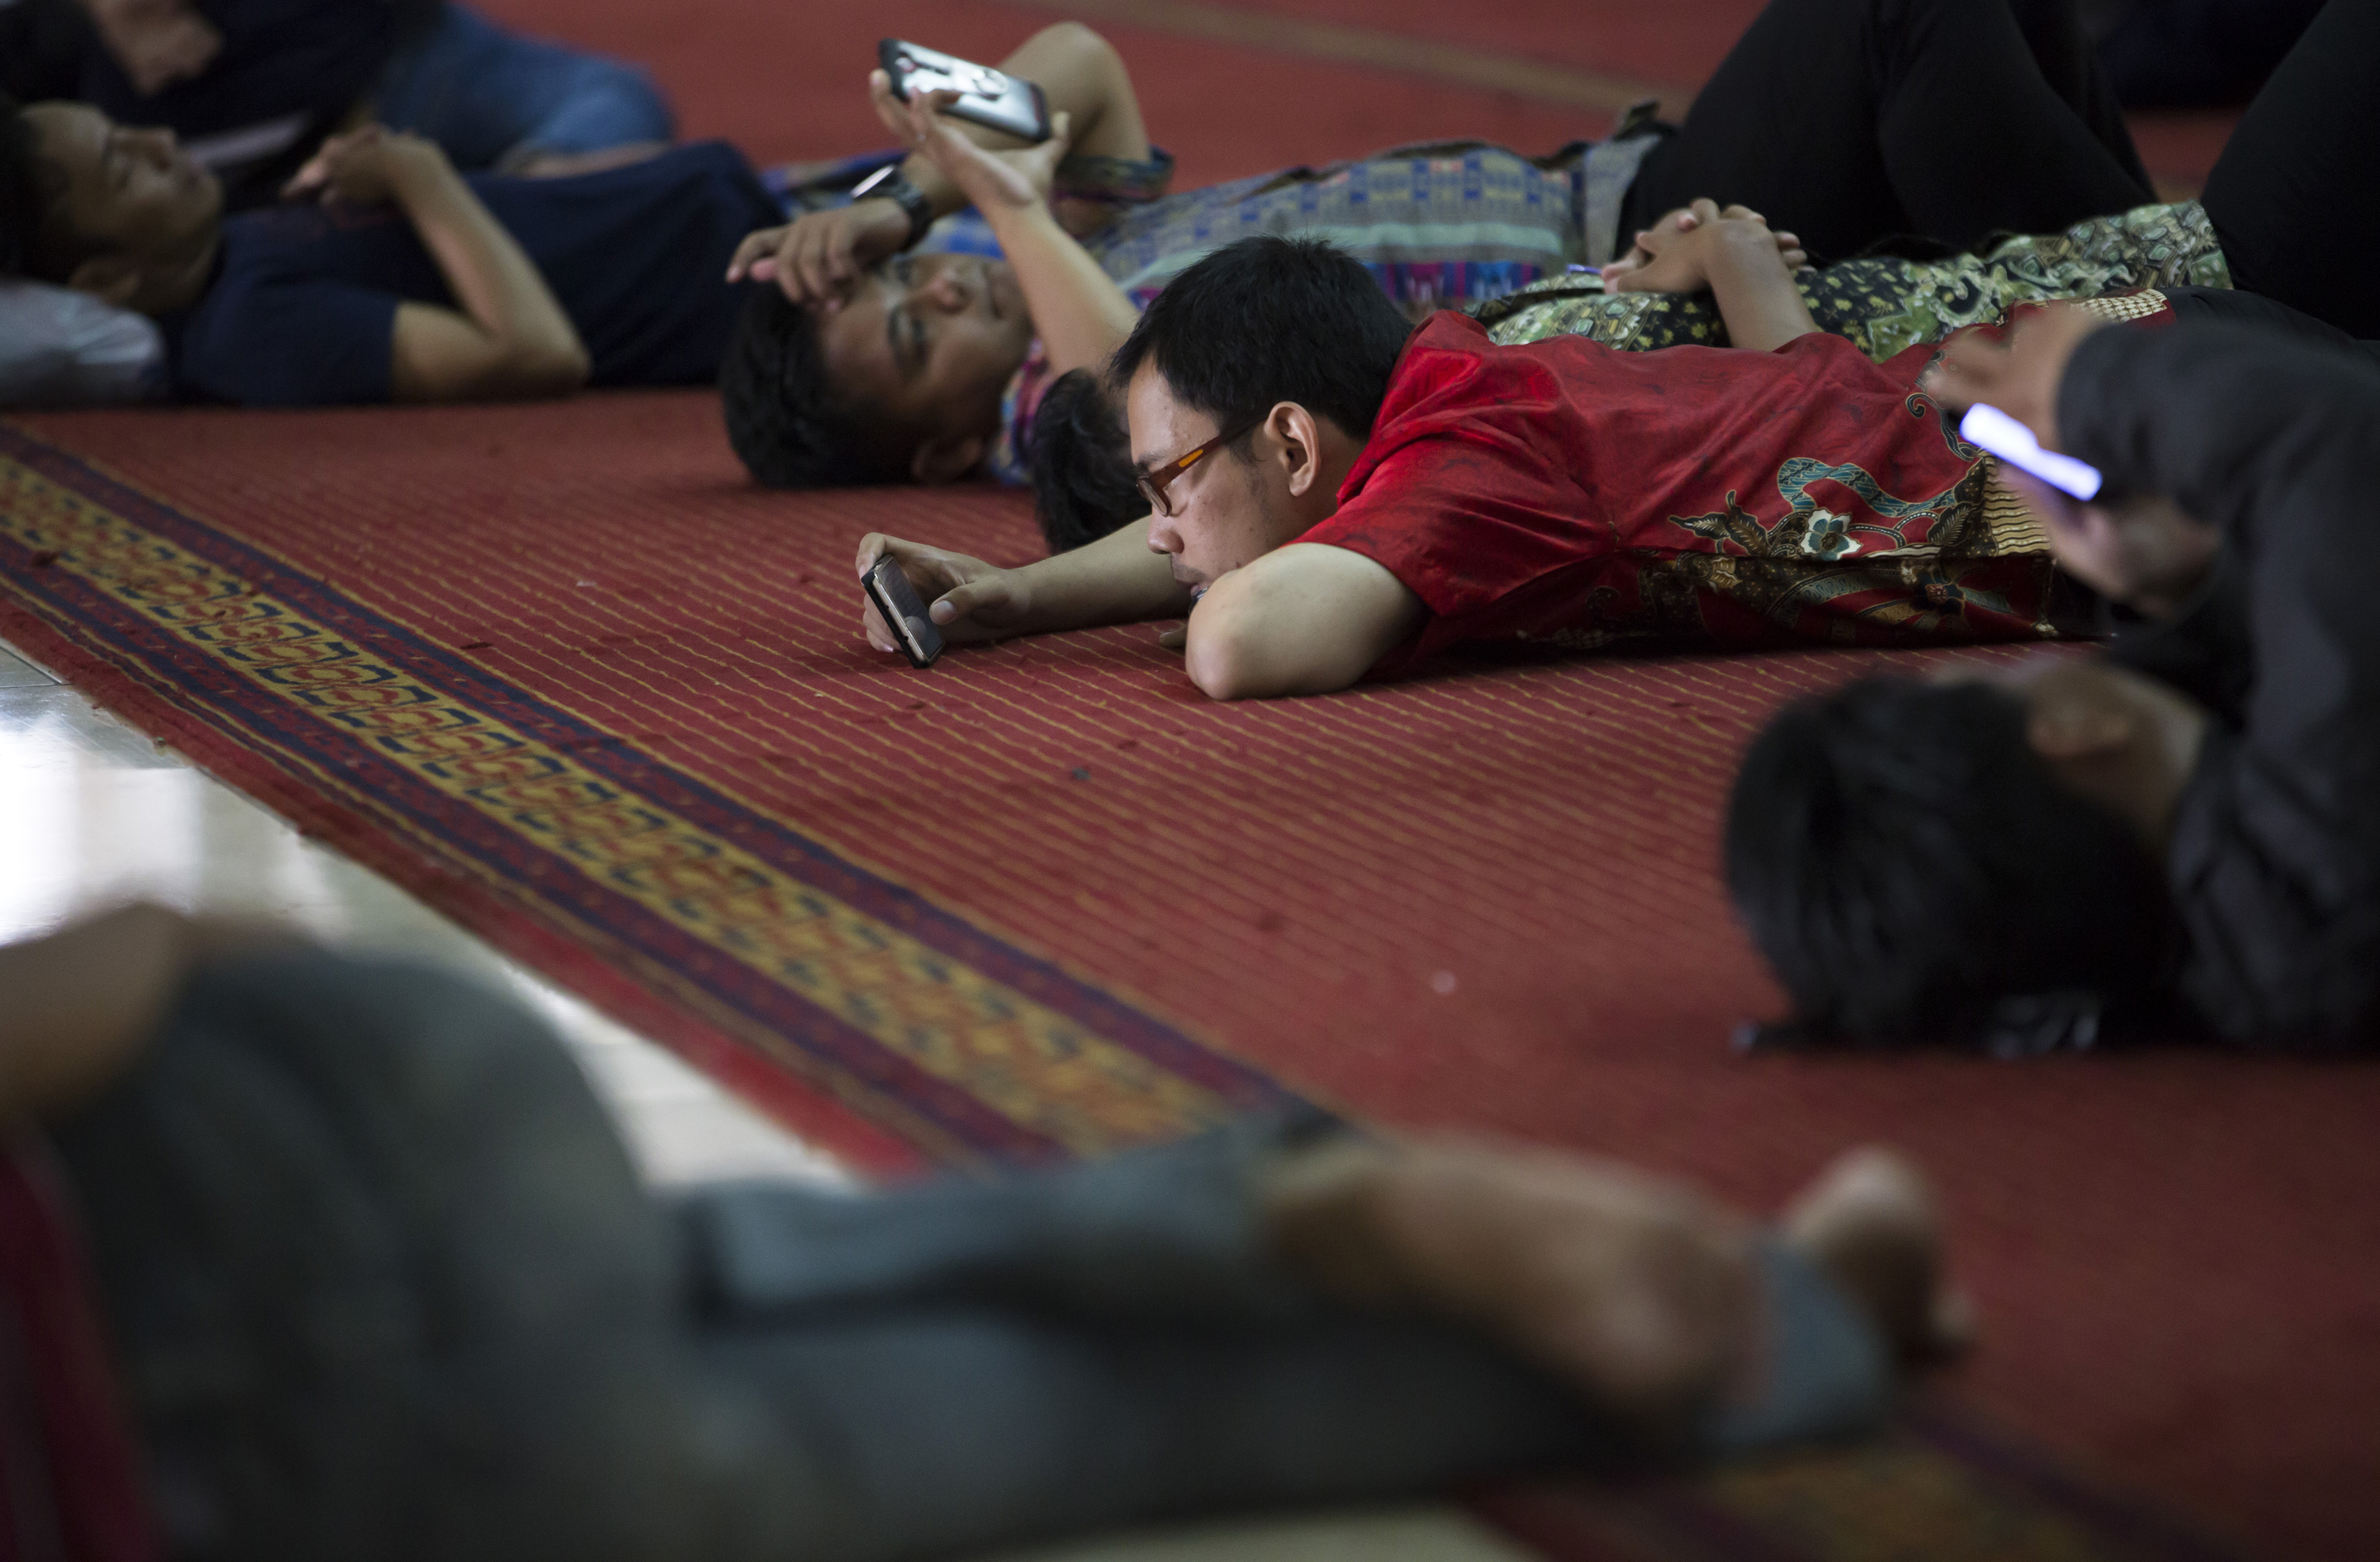 Muslims use smartphones as they rest after attending Friday prayers at the Istiqlal Mosque on Sept. 30, 2016, in Jakarta (Tomohiro Ohsumi—Getty Images)